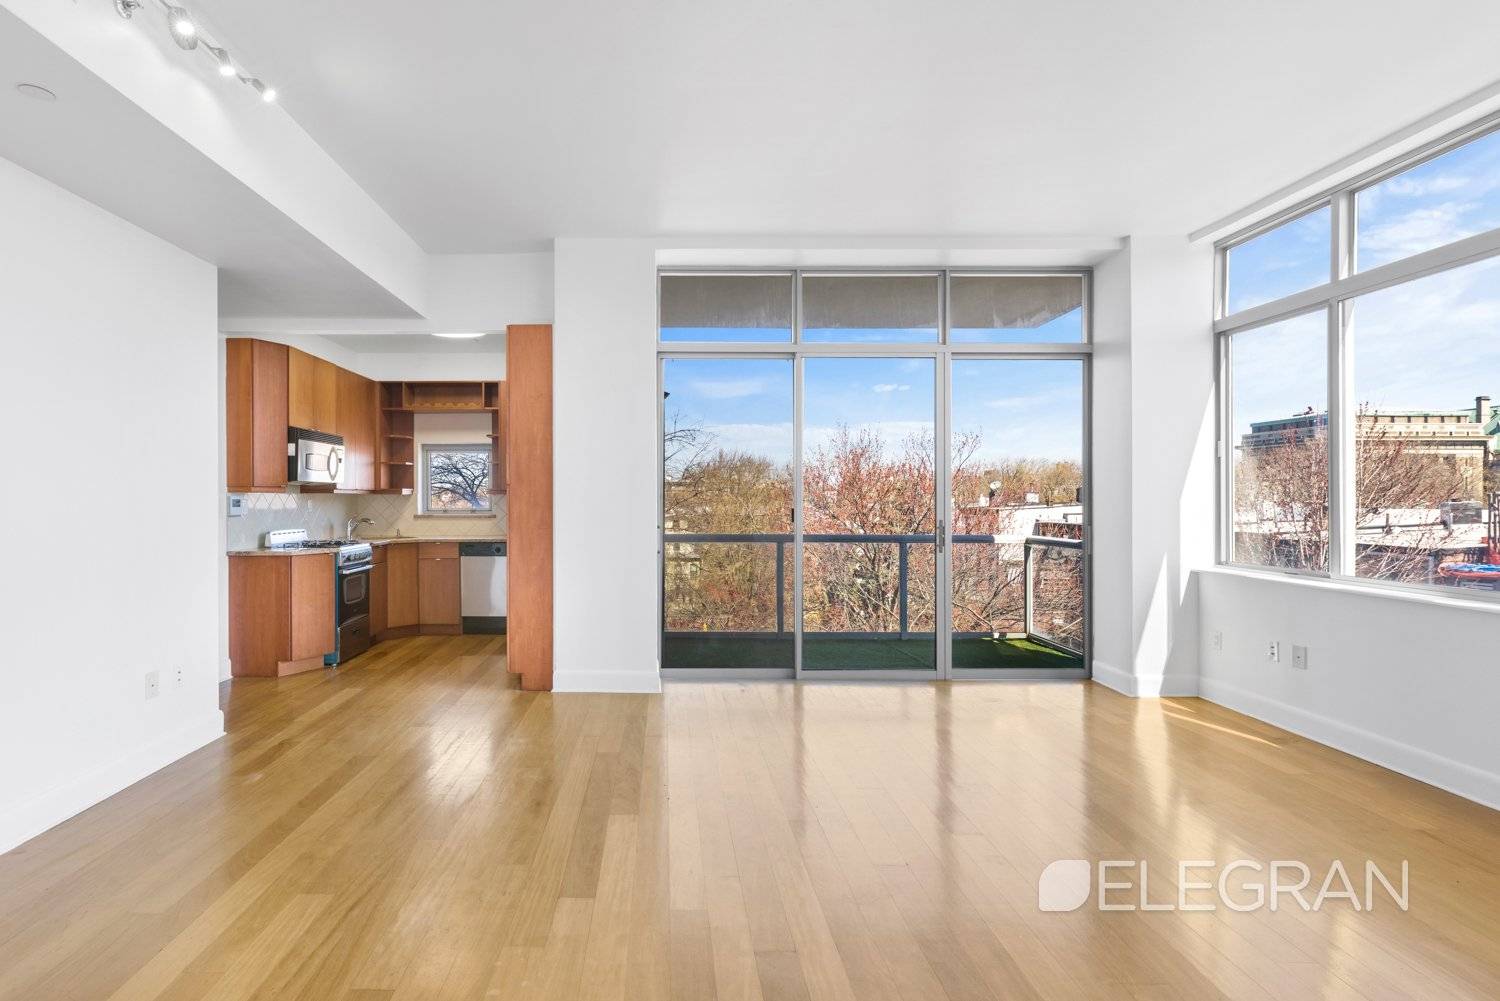 Your own tree house with phenomenal Empire State amp ; cityscape views.